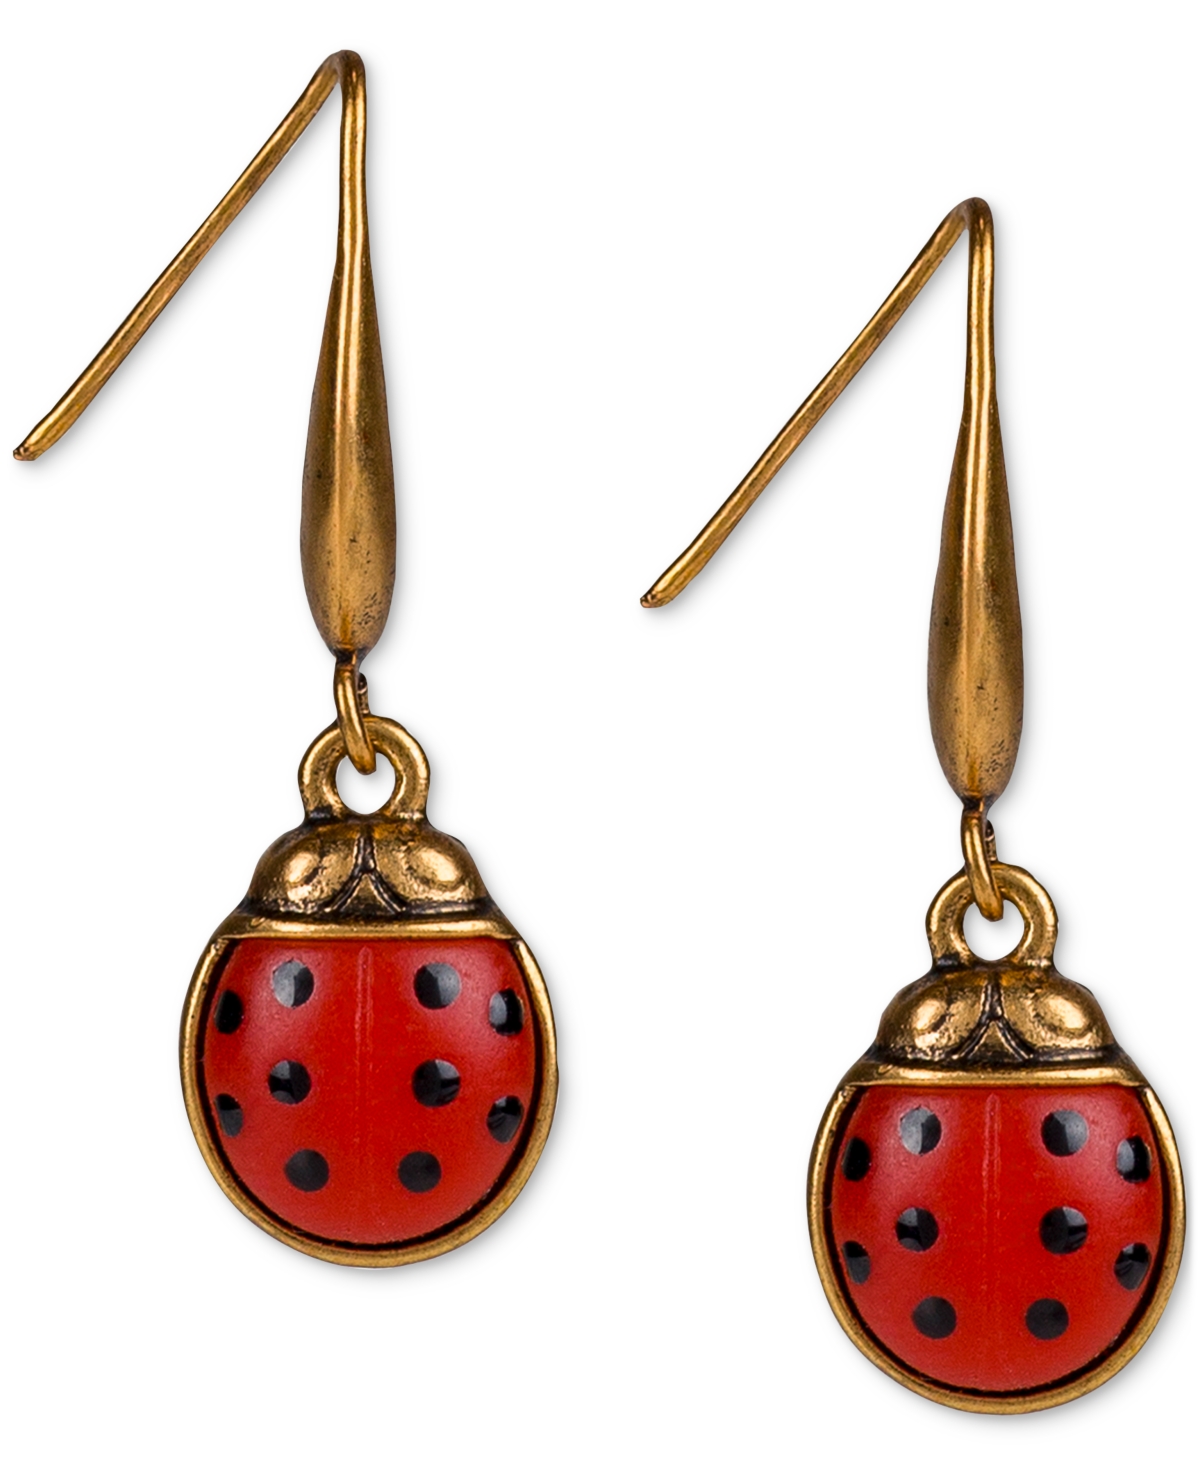 Patricia Nash Gold-tone Red Ladybug Drop Earrings In Antique Go